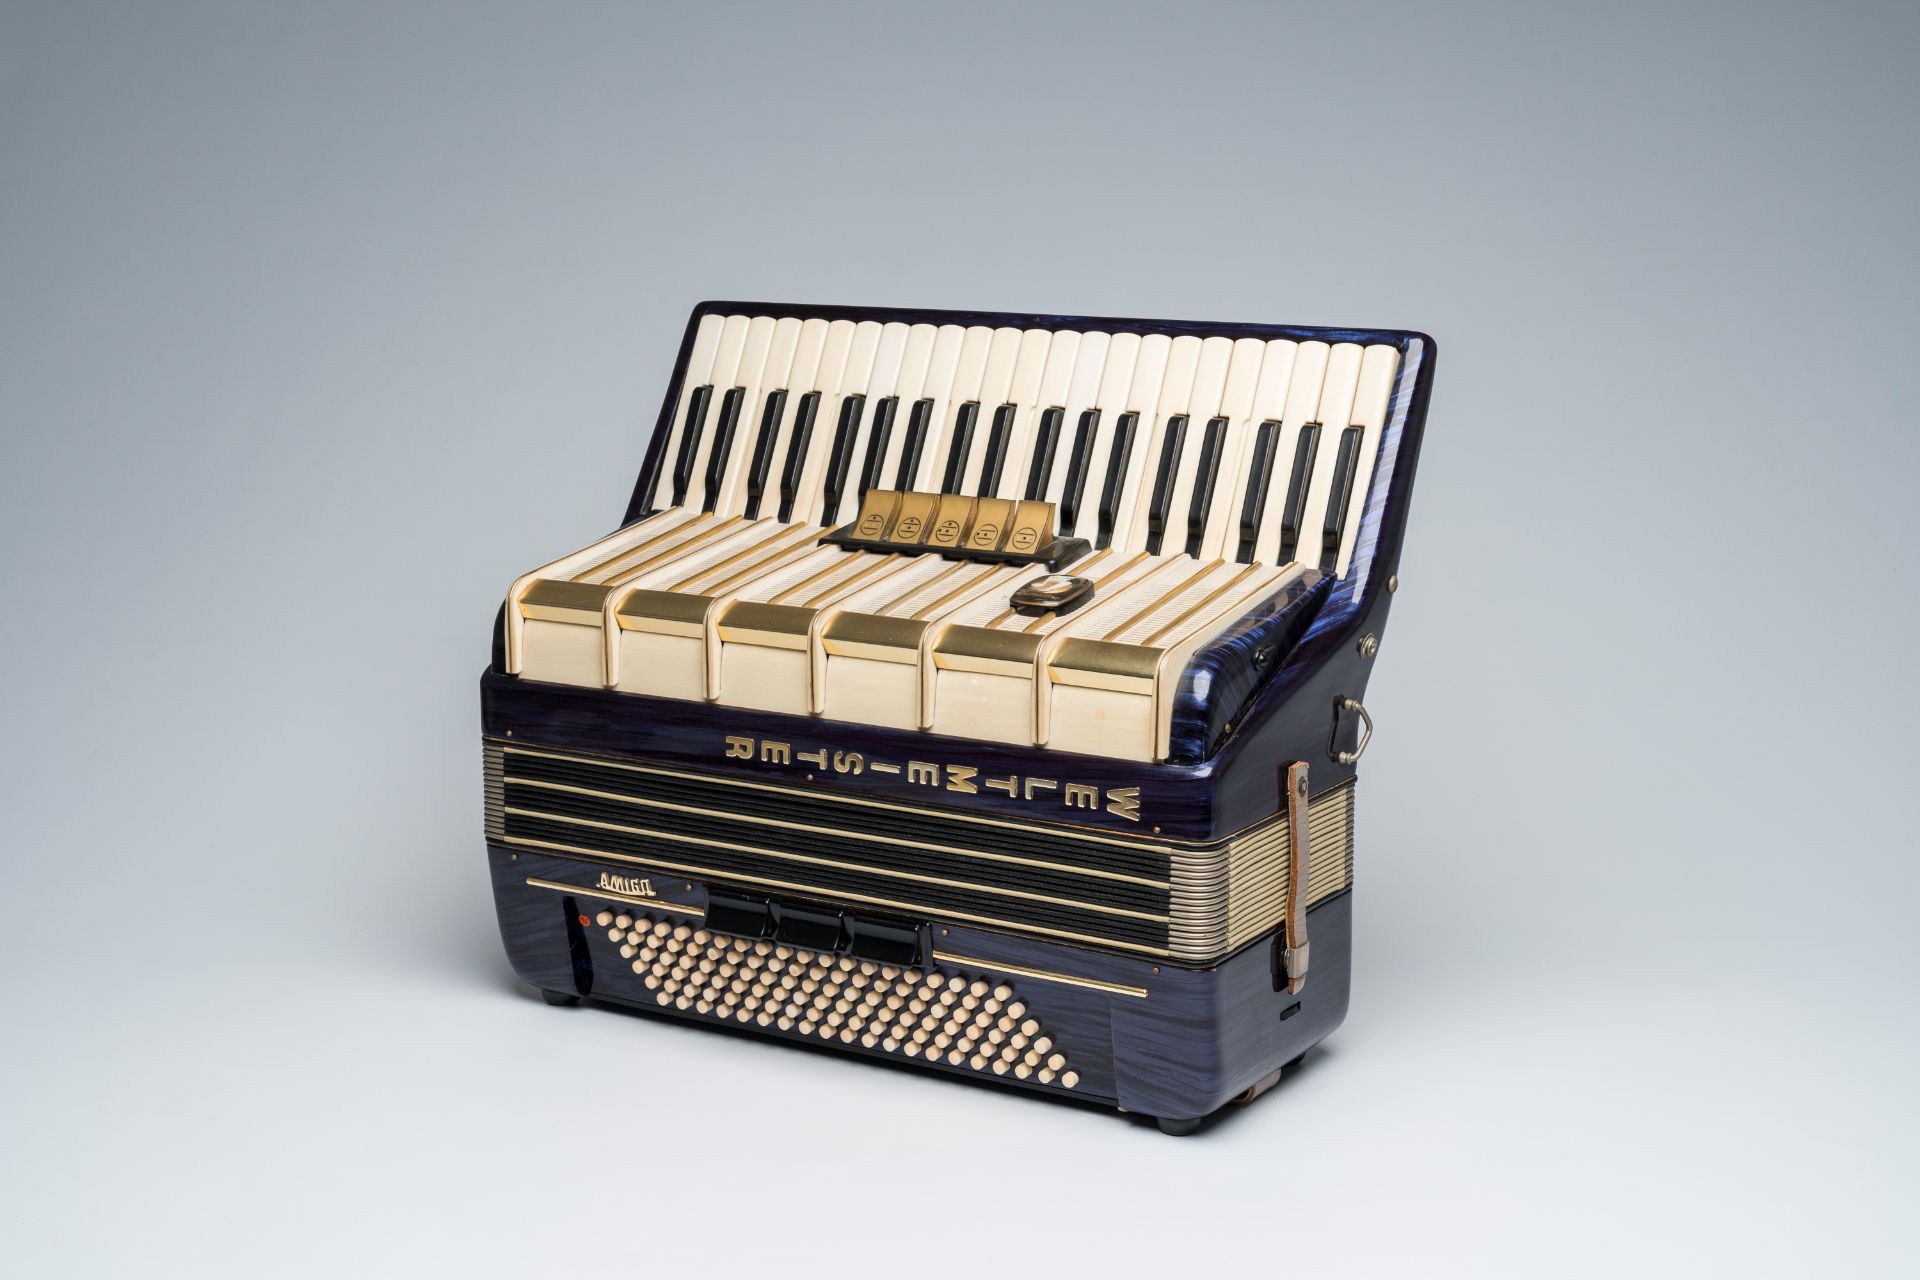 A 'Weltmeister' chromatic accordion with piano keyboard, ca. 1960